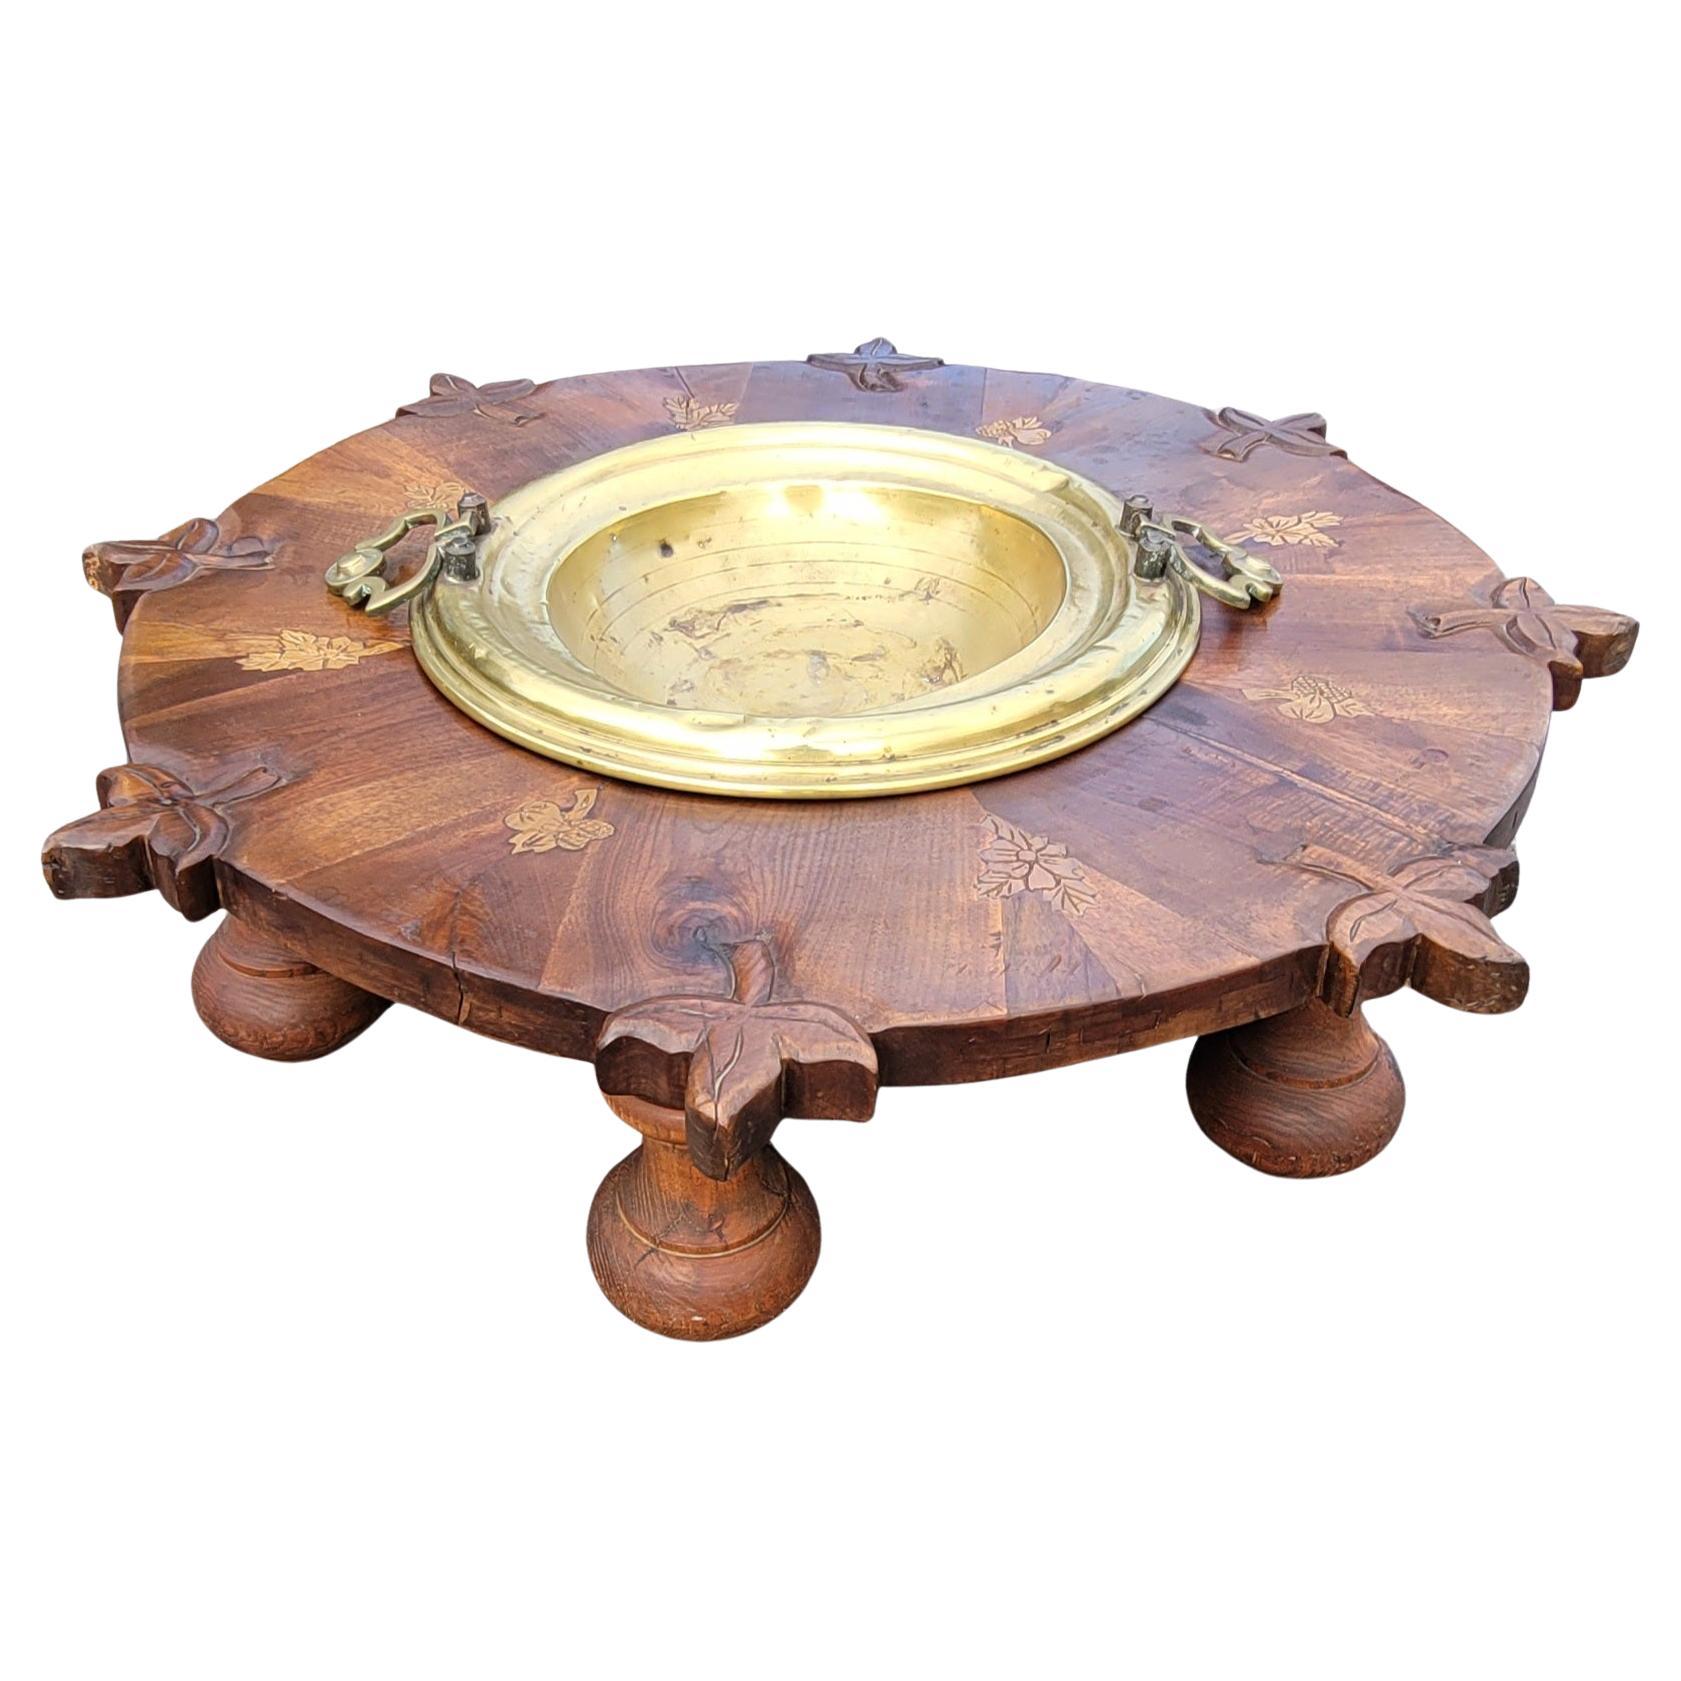 1920s, Carved Walnut and Inlays and Brass Inset Spanish "Brassero" Firepit Table For Sale